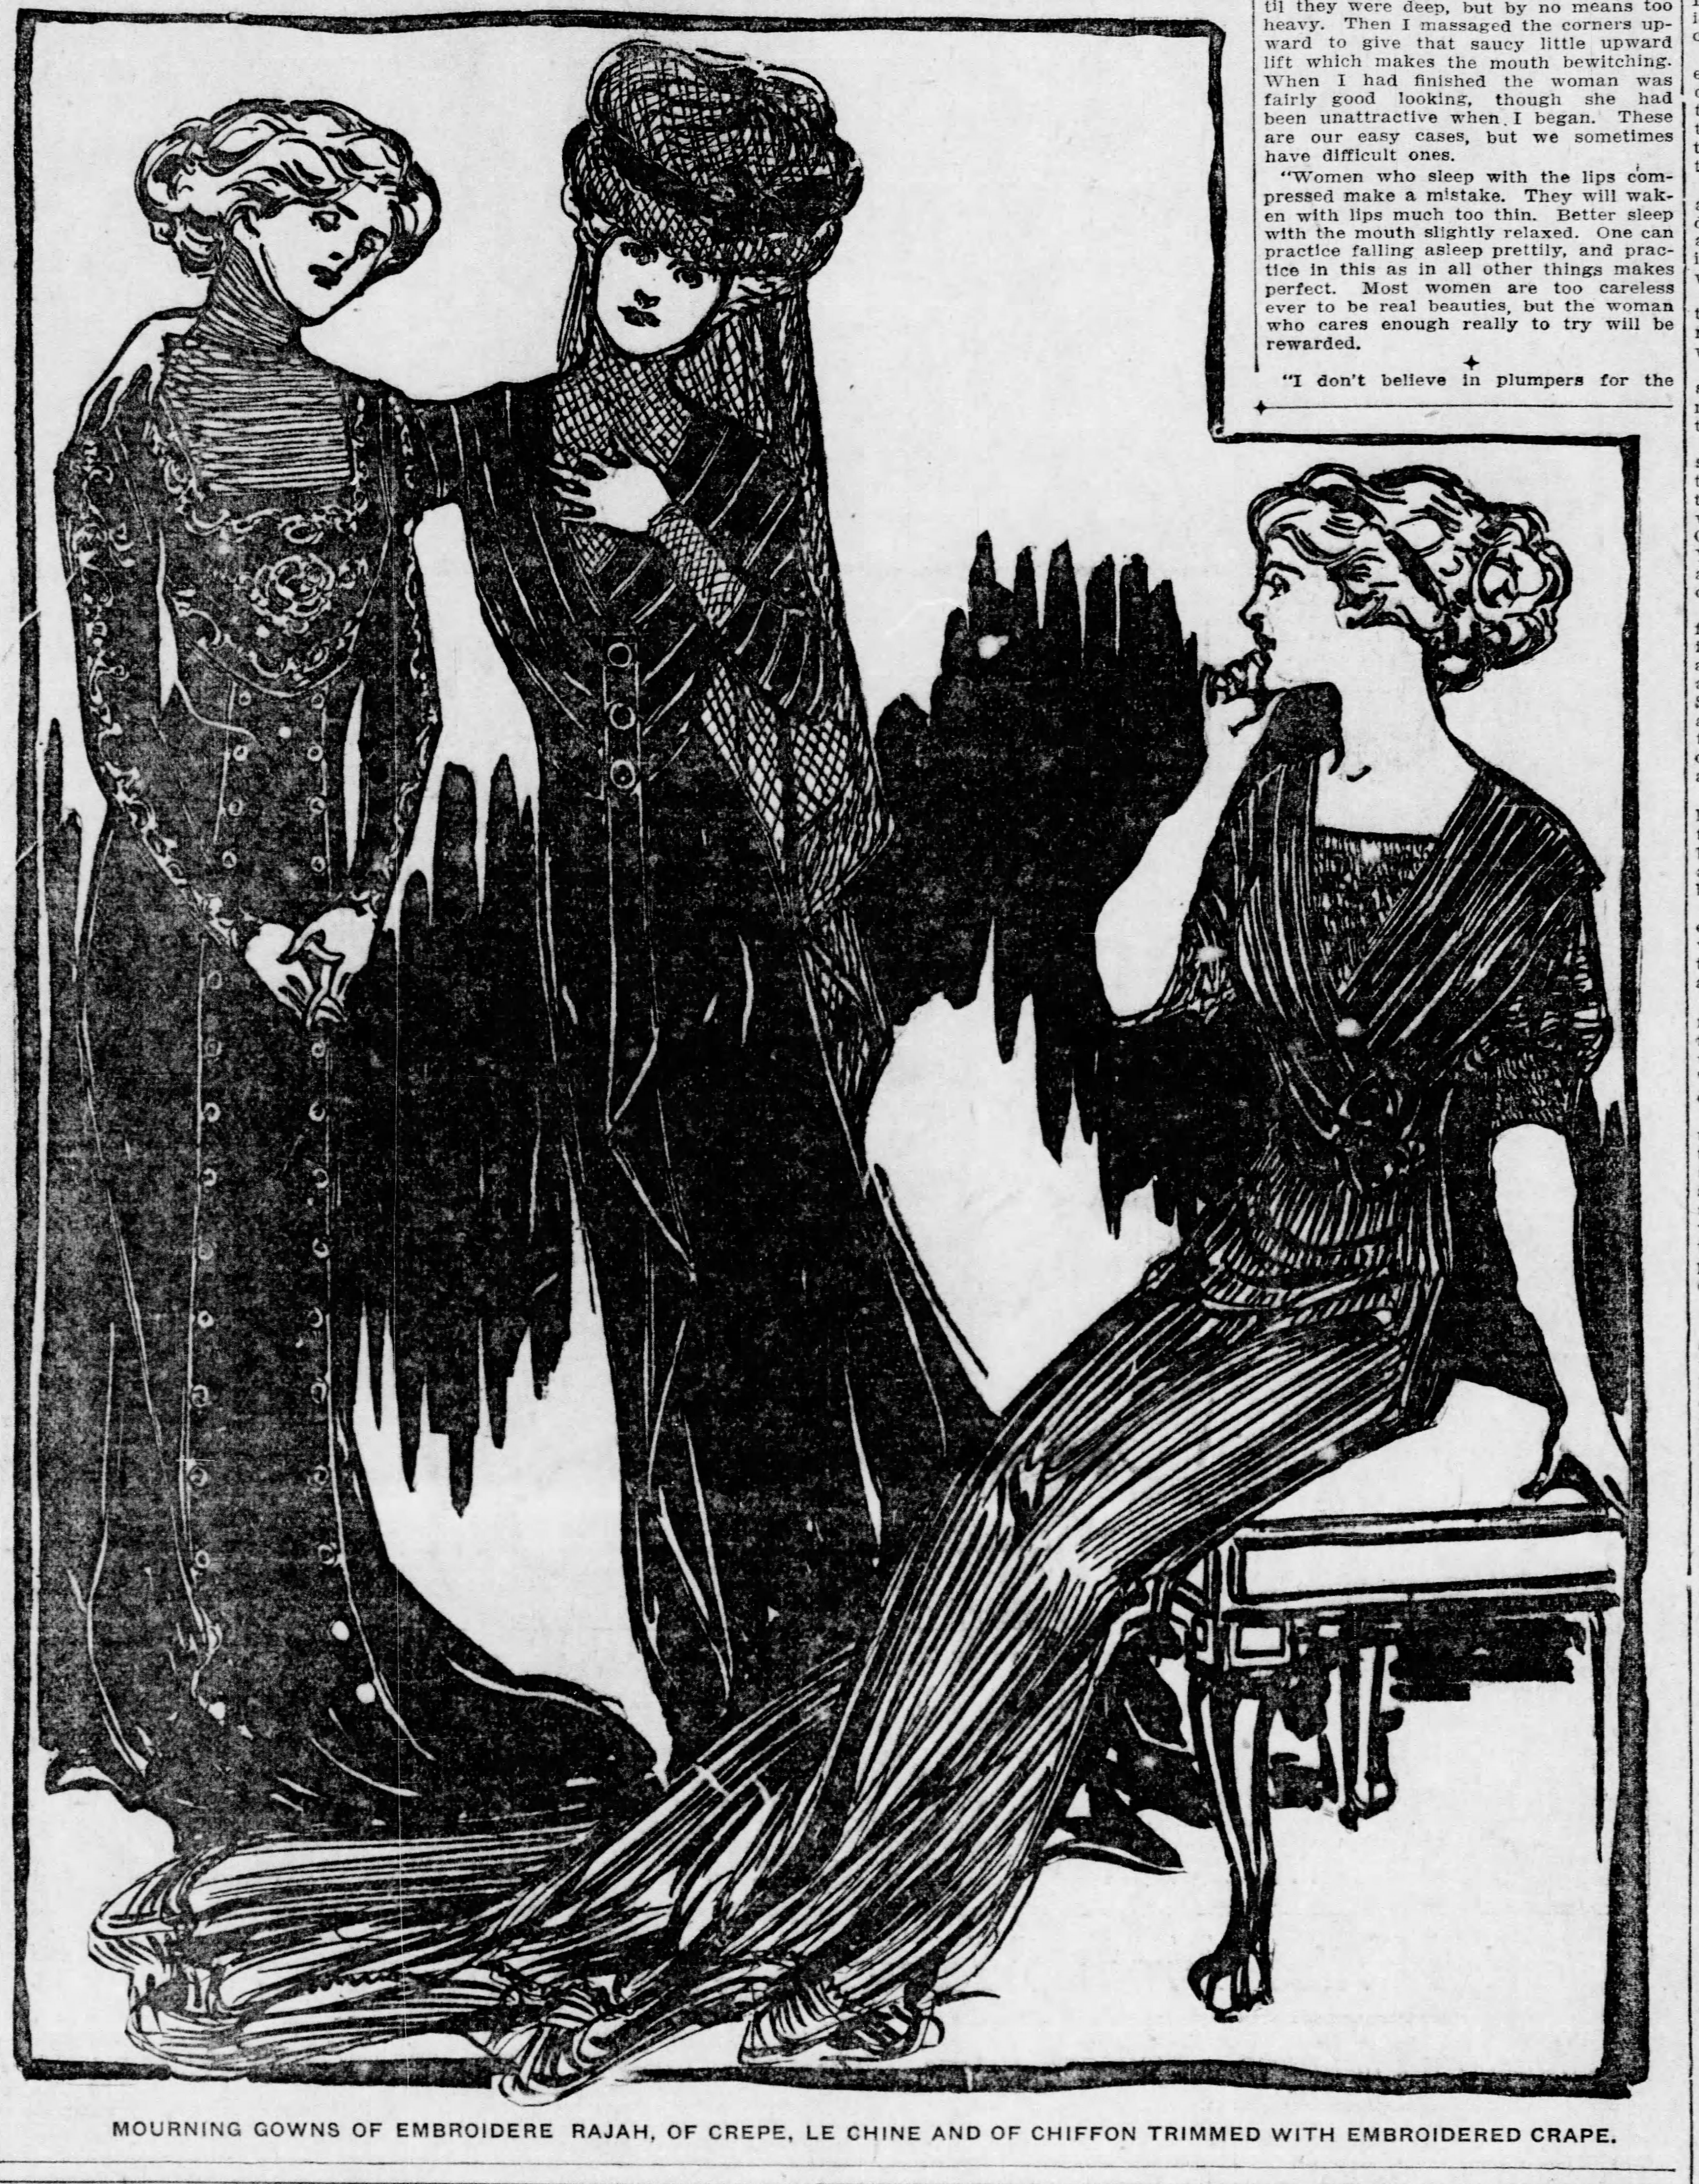 Mourning dress in the Pittsburgh Daily Post, Sunday, August 22, 1909